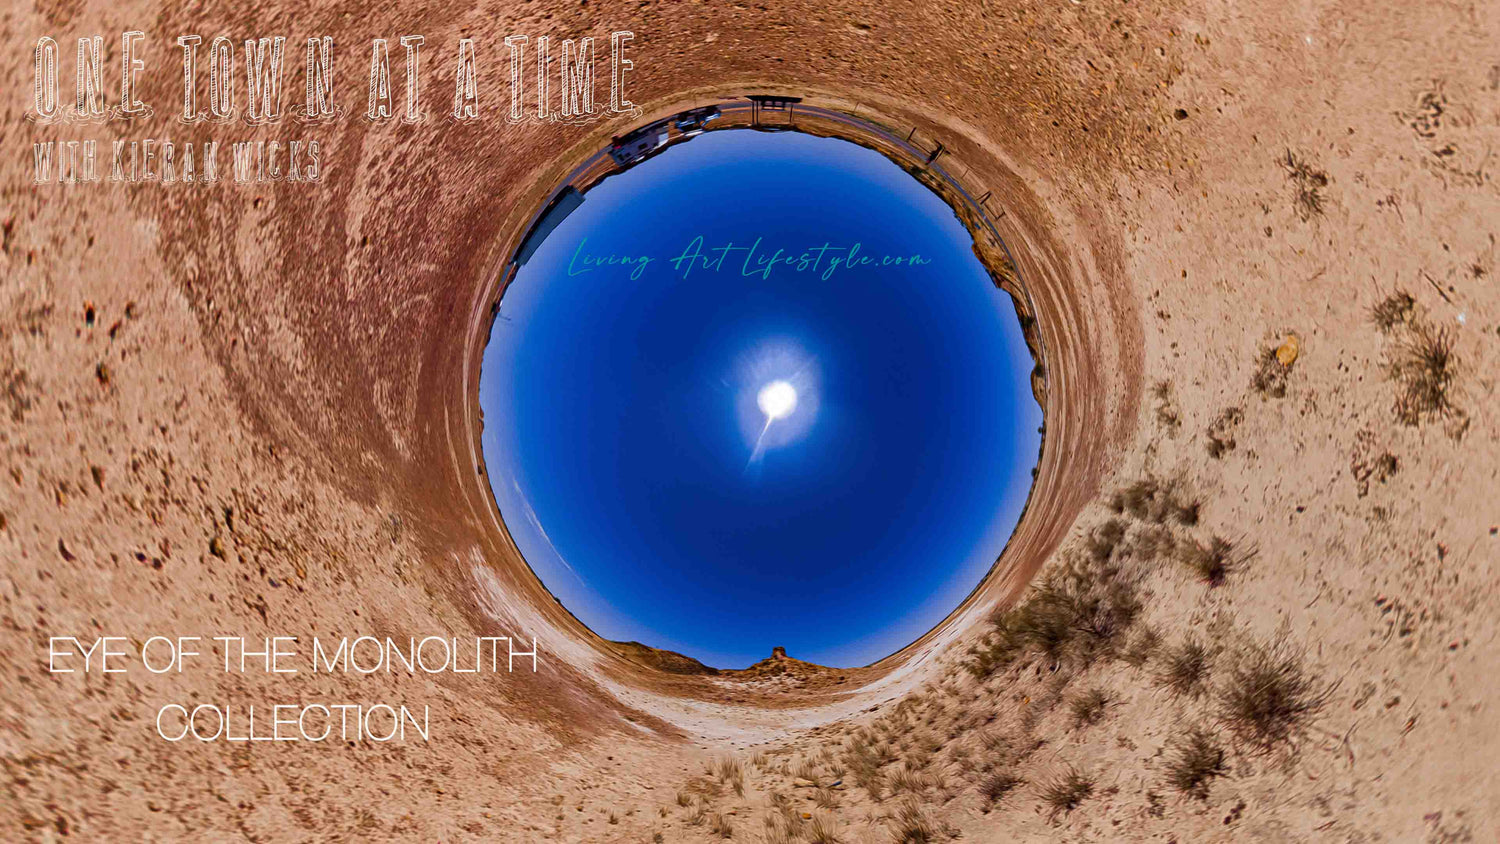 EYE OF THE MONOLITH, GOPRO 360VR LITTLE PLANET PERSPECTIVE OF THE MONOLITH AT WANORA DOWNS, OUTBACK QUEENSLAND. PLACES TO VISIT, AUSTRALIAN DESTINATIONS, THINGS TO DO